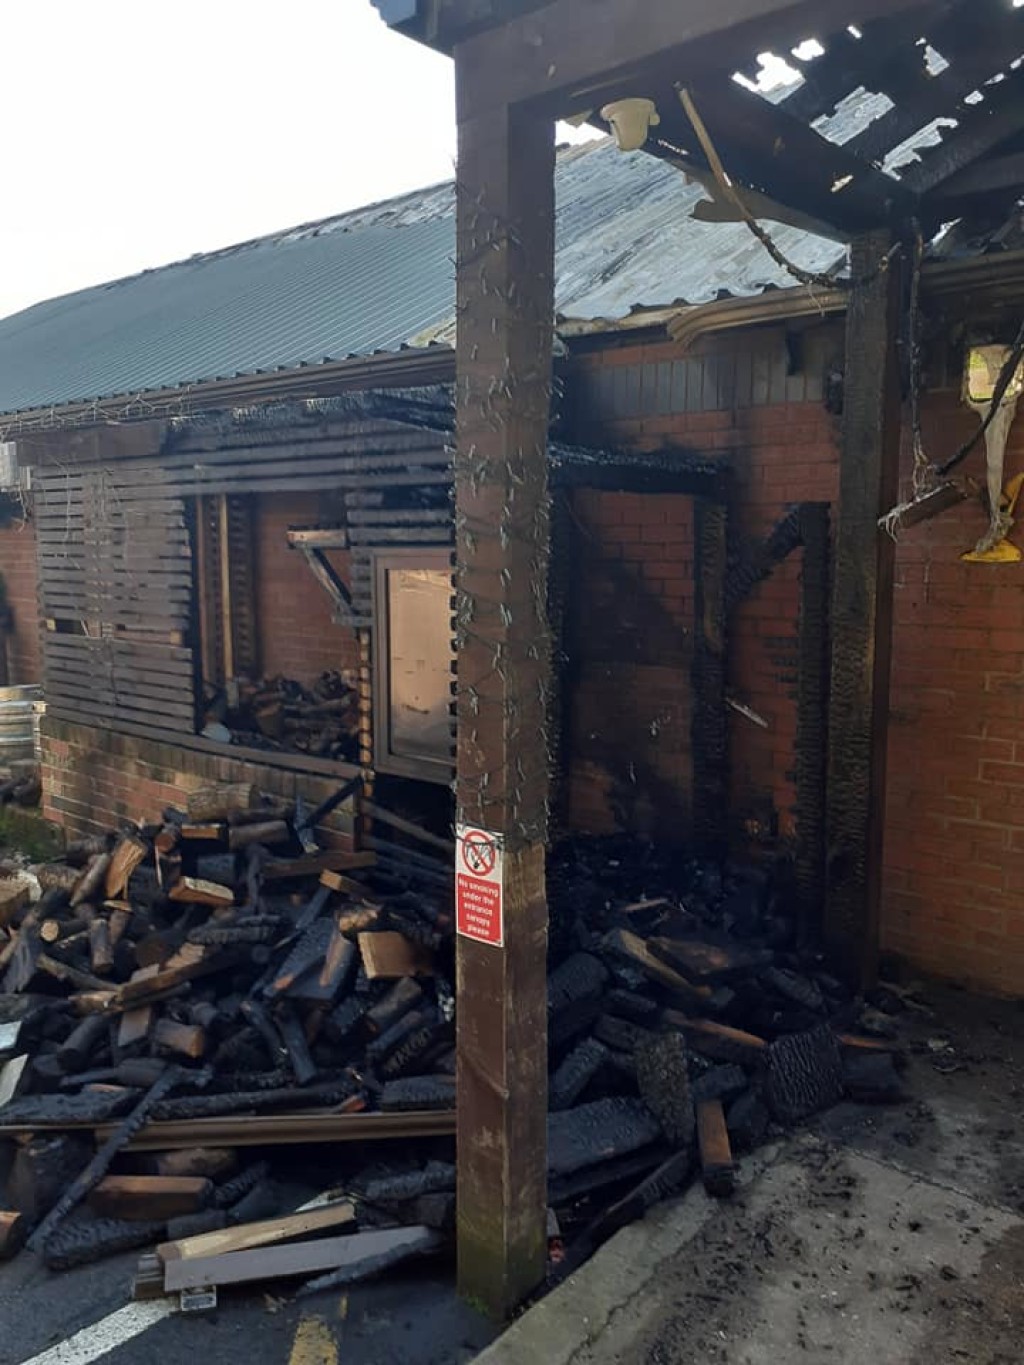 New Farnley clubhouse hit by arson attack